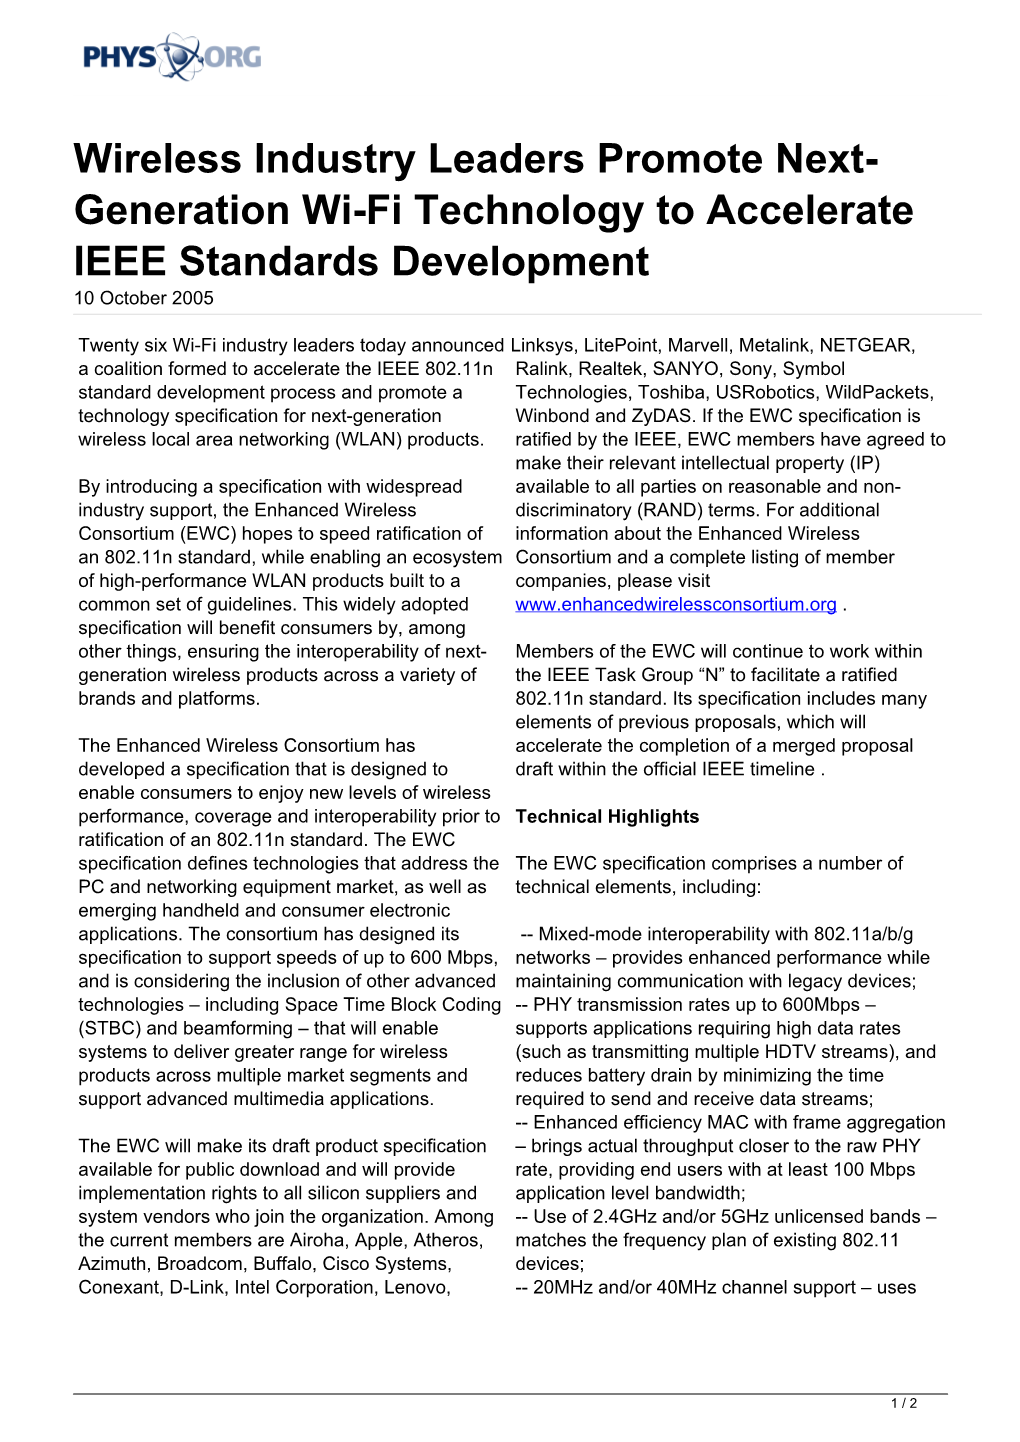 Wireless Industry Leaders Promote Next-Generation Wi-Fi Technology to Accelerate IEEE Standards Development